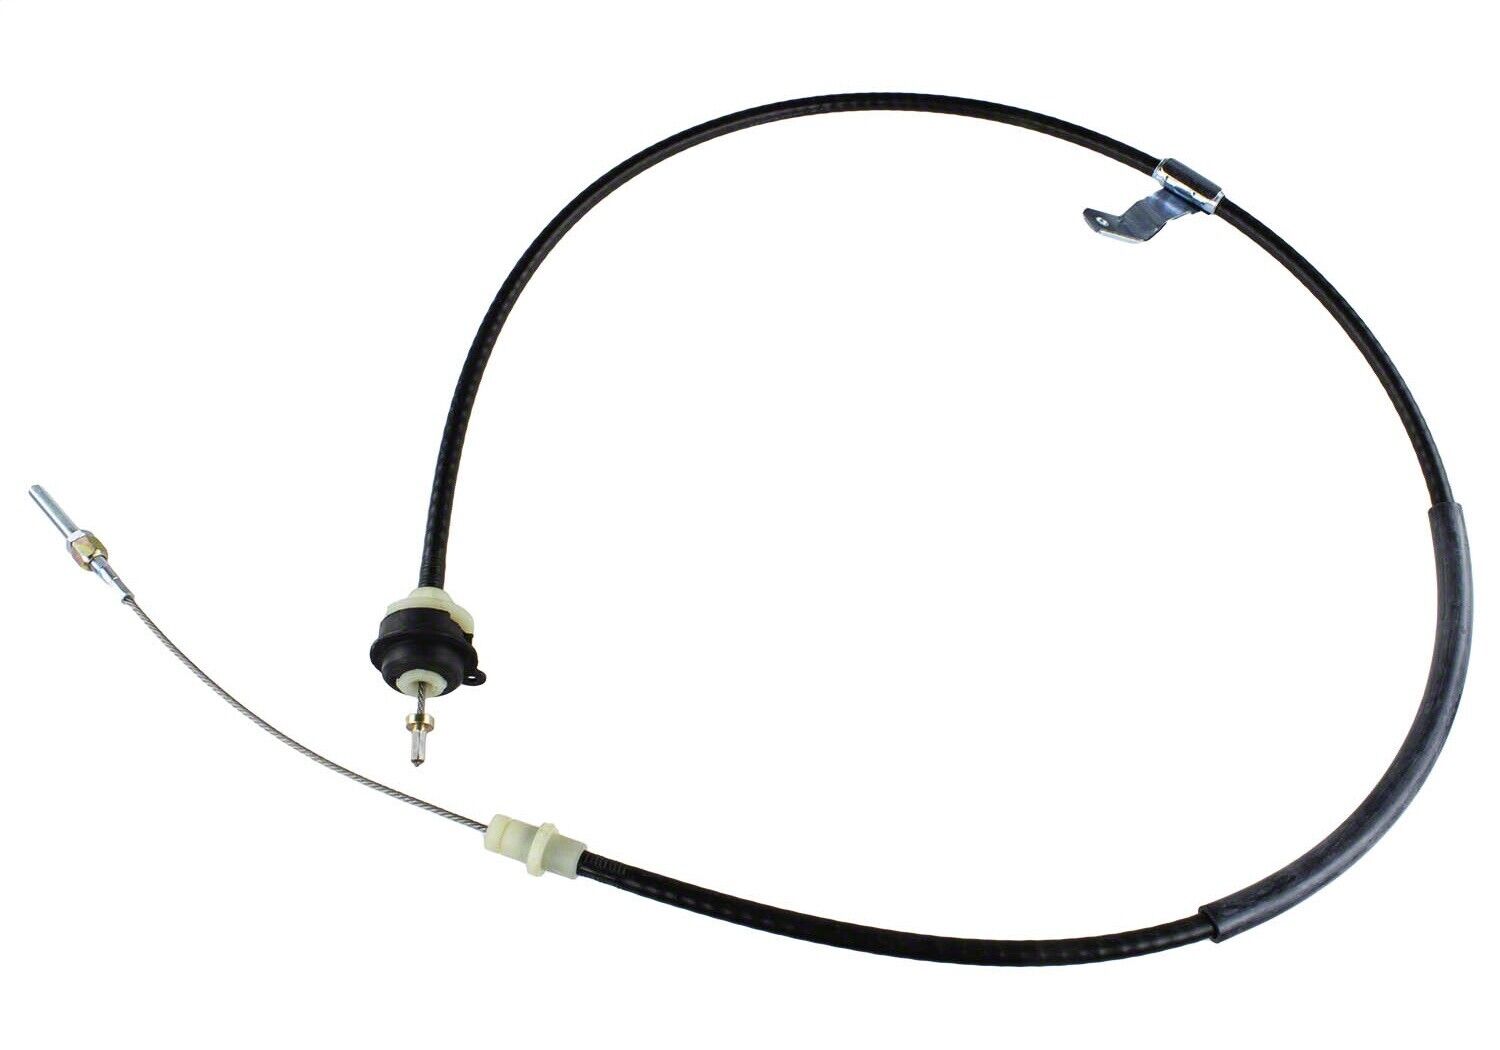 Ford Performance Parts M-7553-C302 Clutch Cable Fits 82-95 Capri Mustang